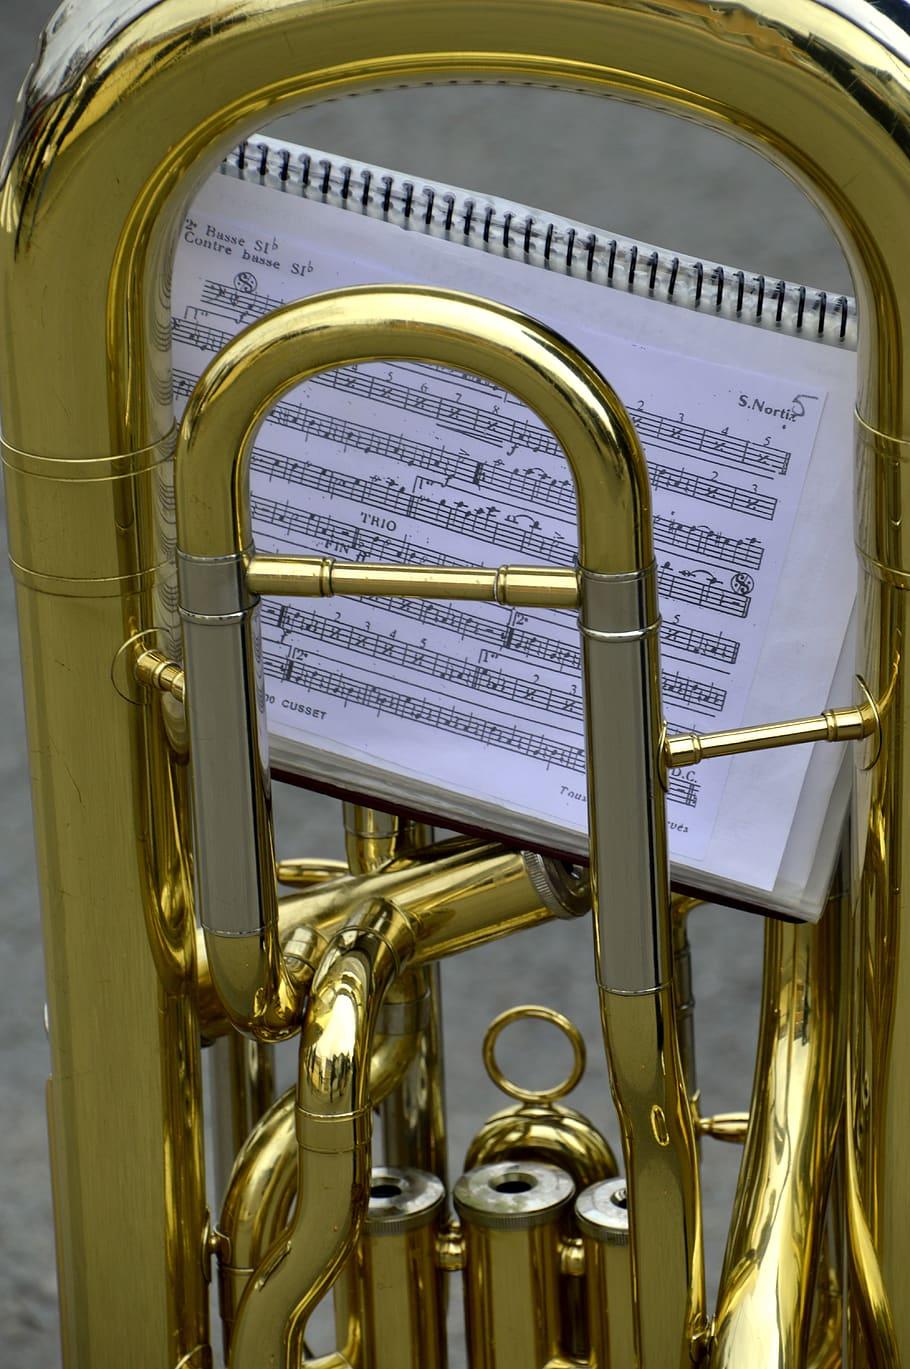 HD wallpaper: brass, gold, music, tuba, partition, jazz, orchestra